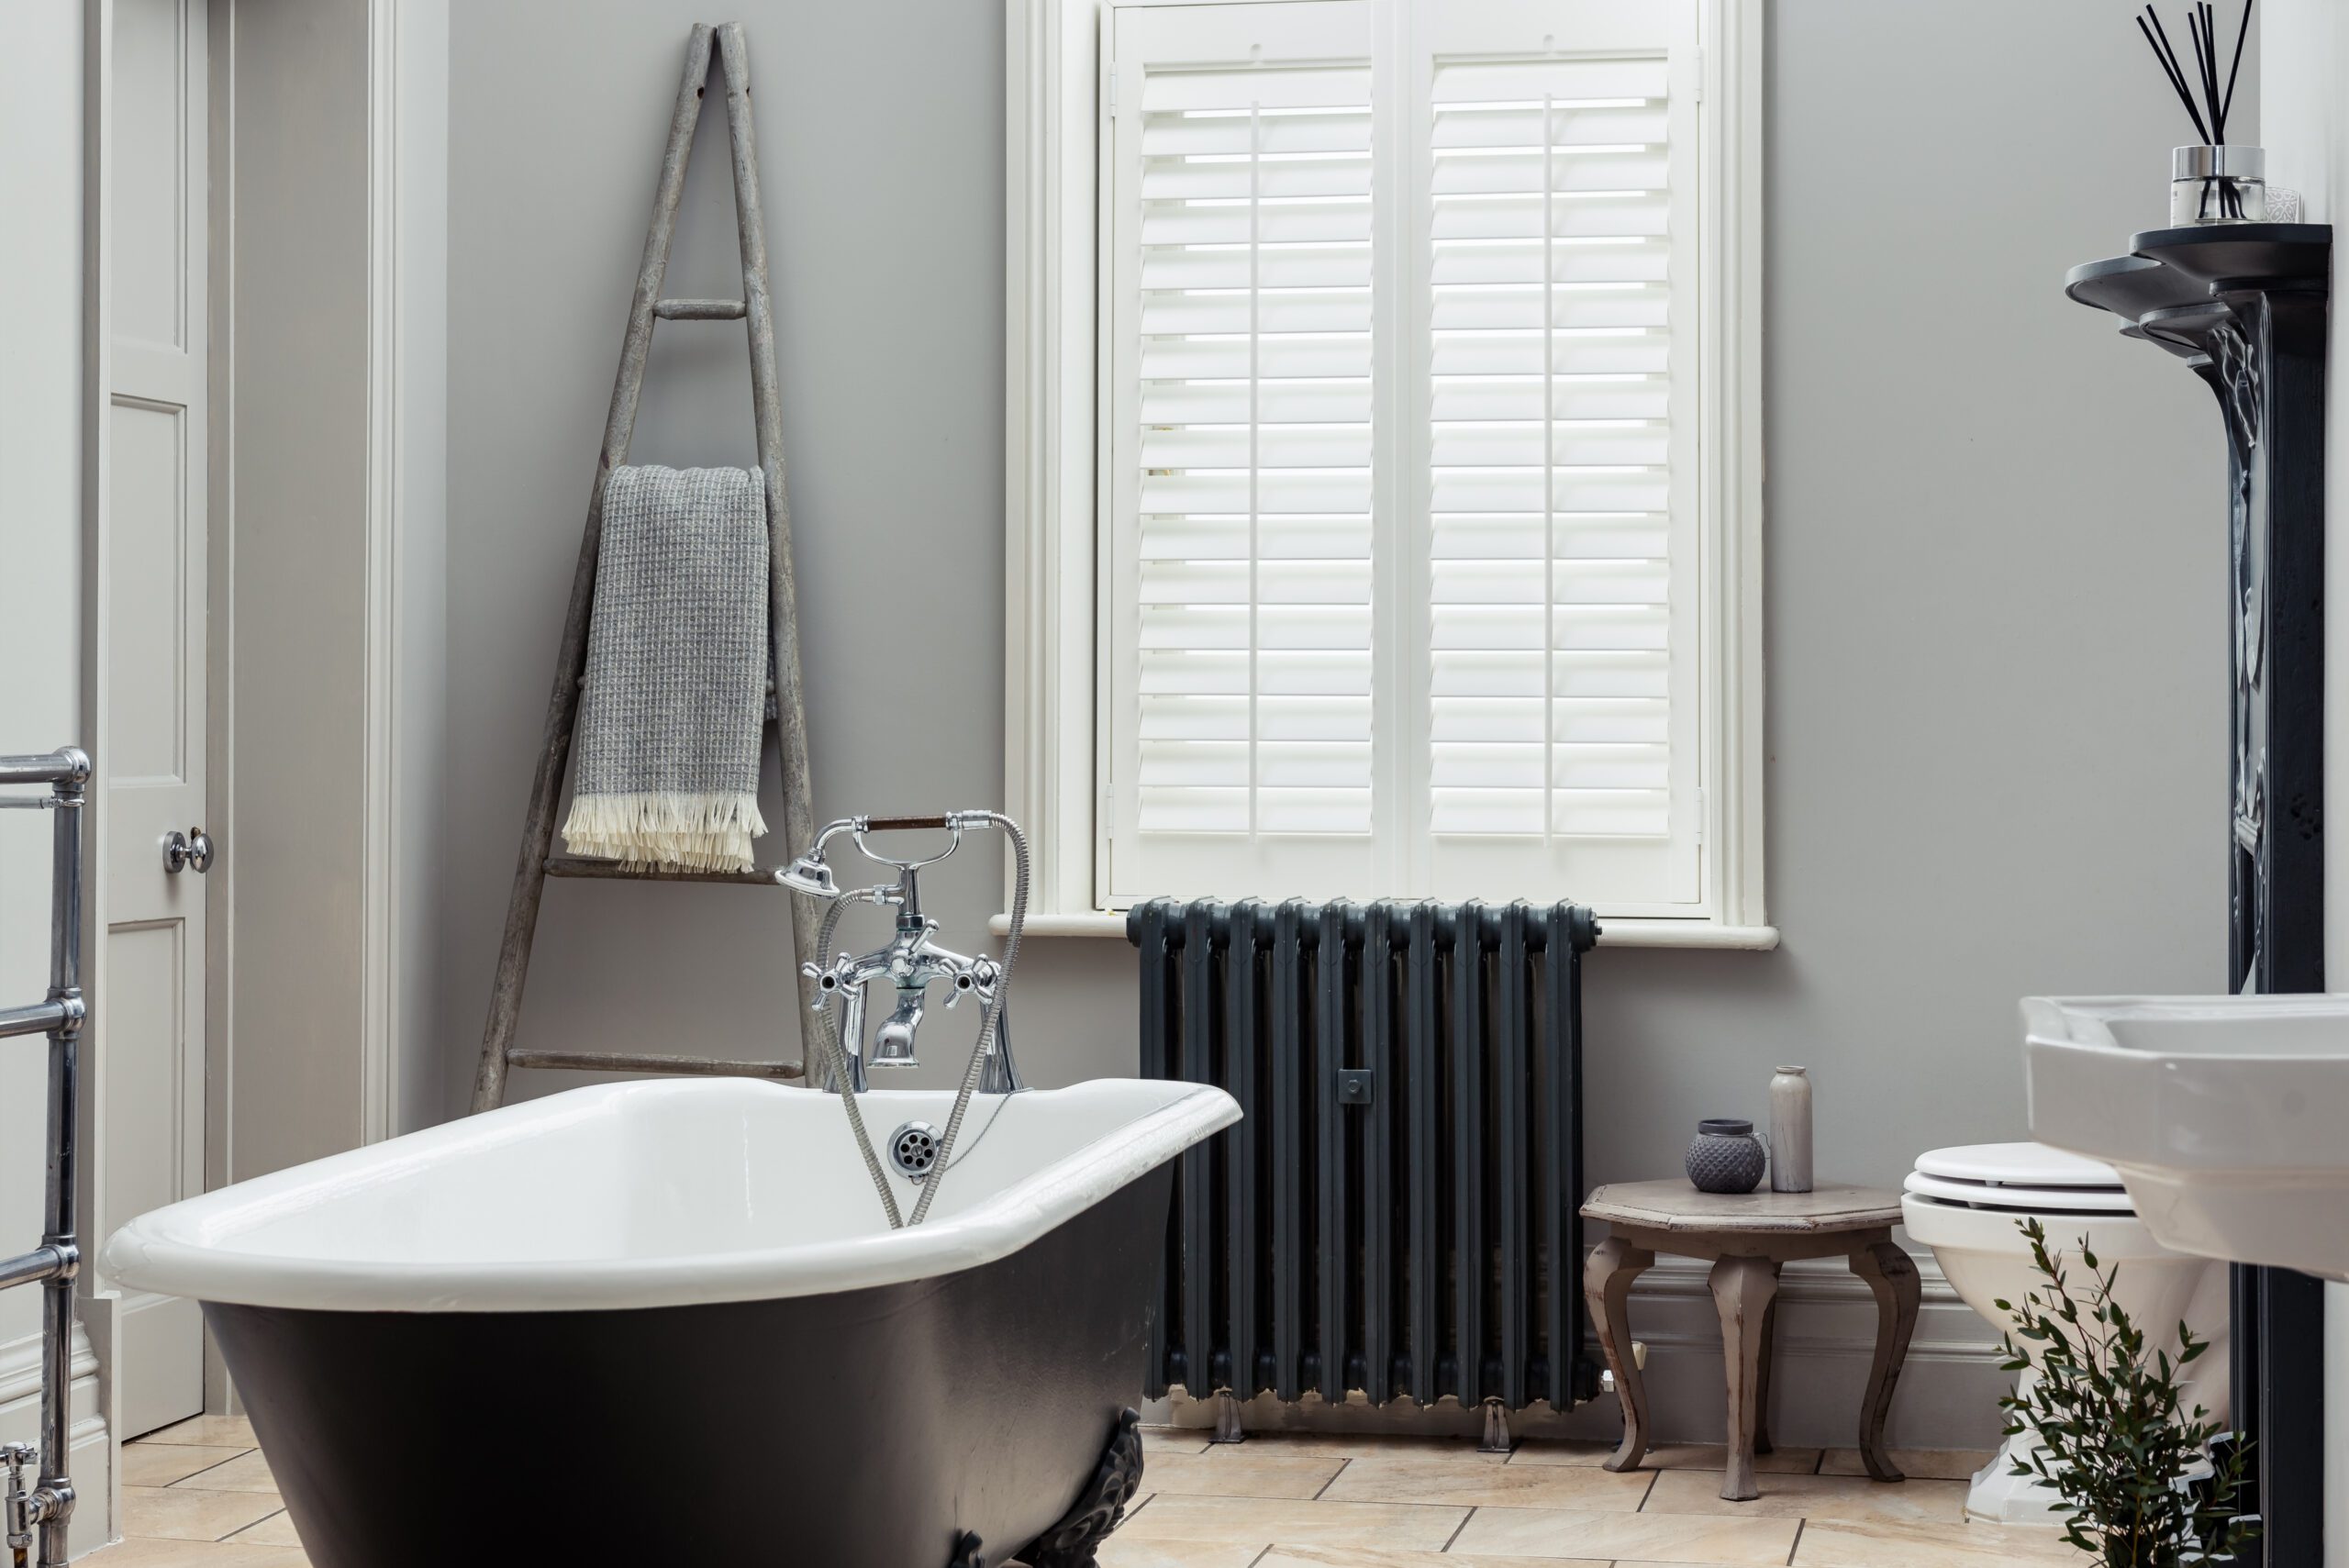 White bathroom shutters in a room with a black and white bathtub